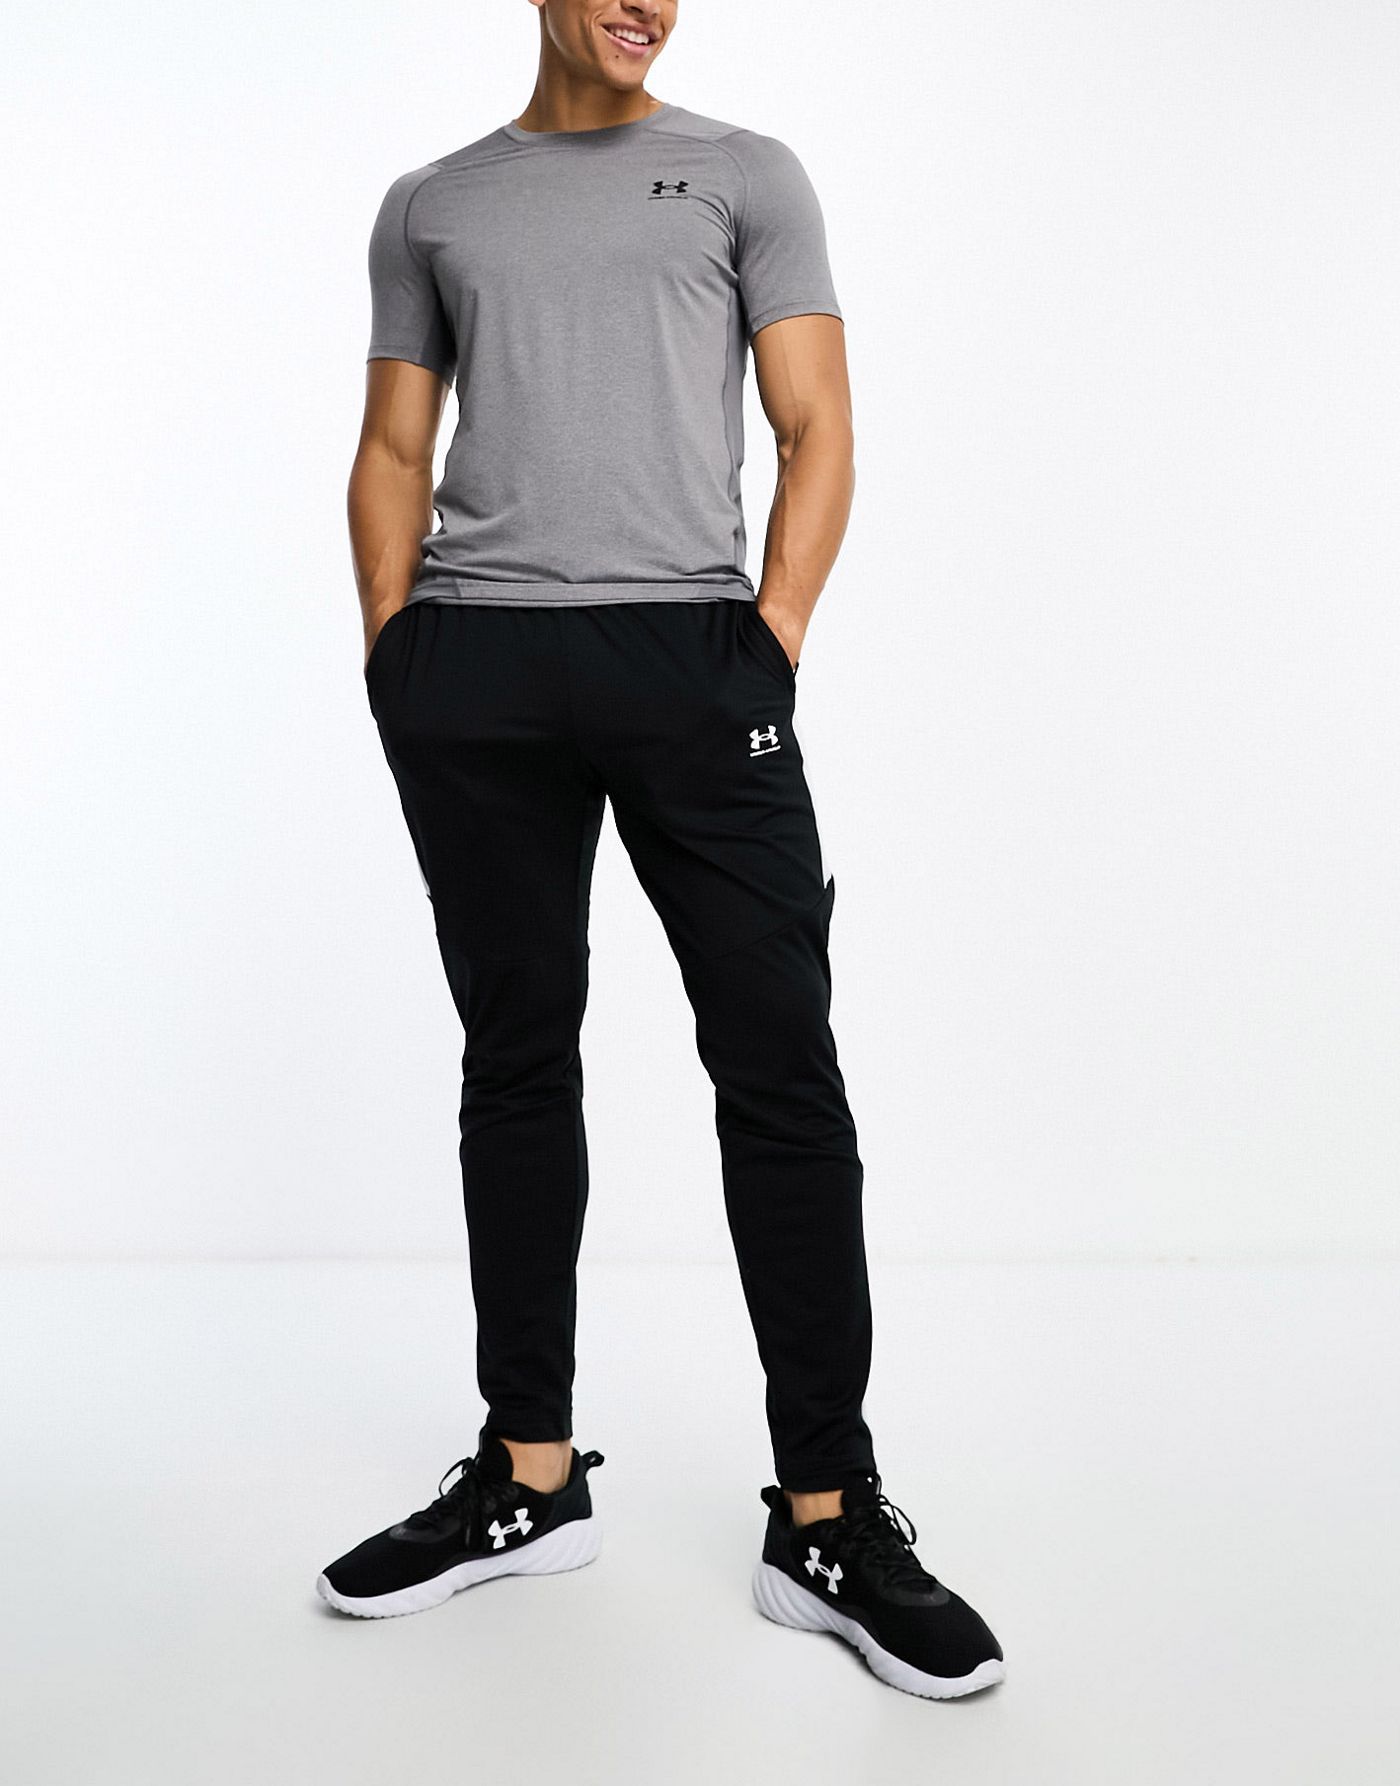 Under Armour Heat Gear Armour fitted t-shirt in grey marl